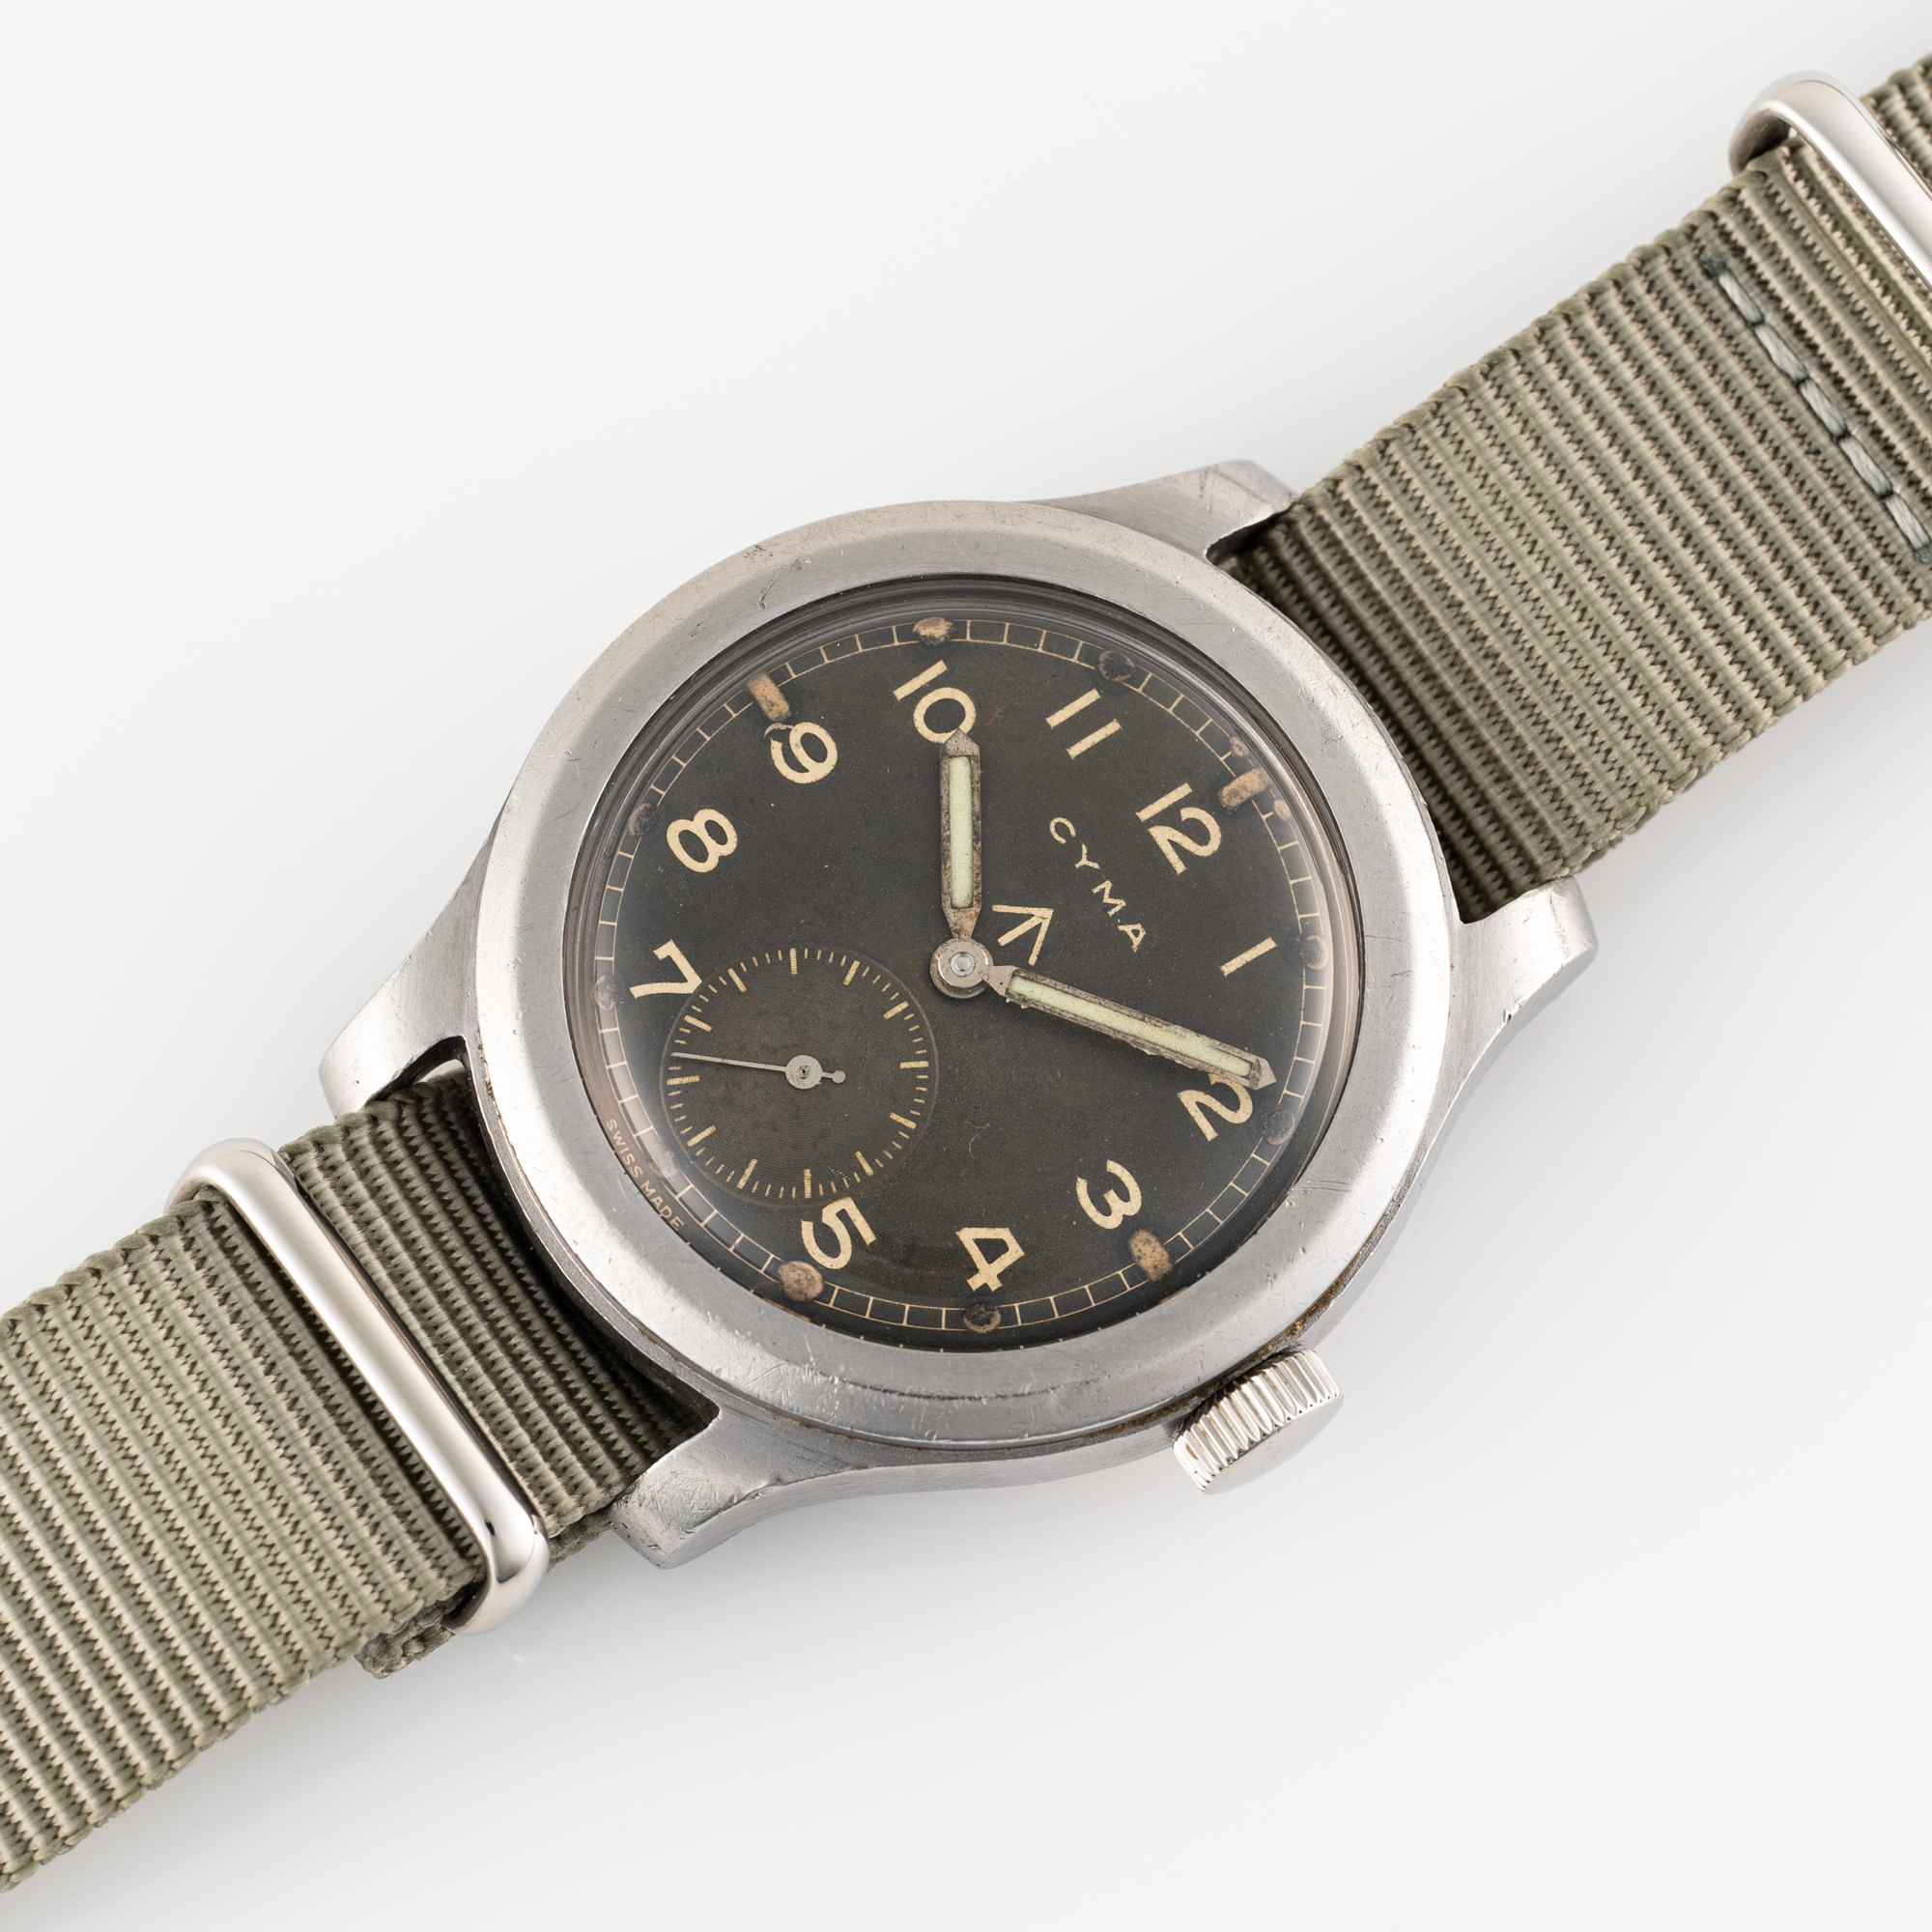 A GENTLEMAN'S STAINLESS STEEL BRITISH MILITARY CYMA W.W.W. WRIST WATCH CIRCA 1945, PART OF THE " - Image 3 of 8